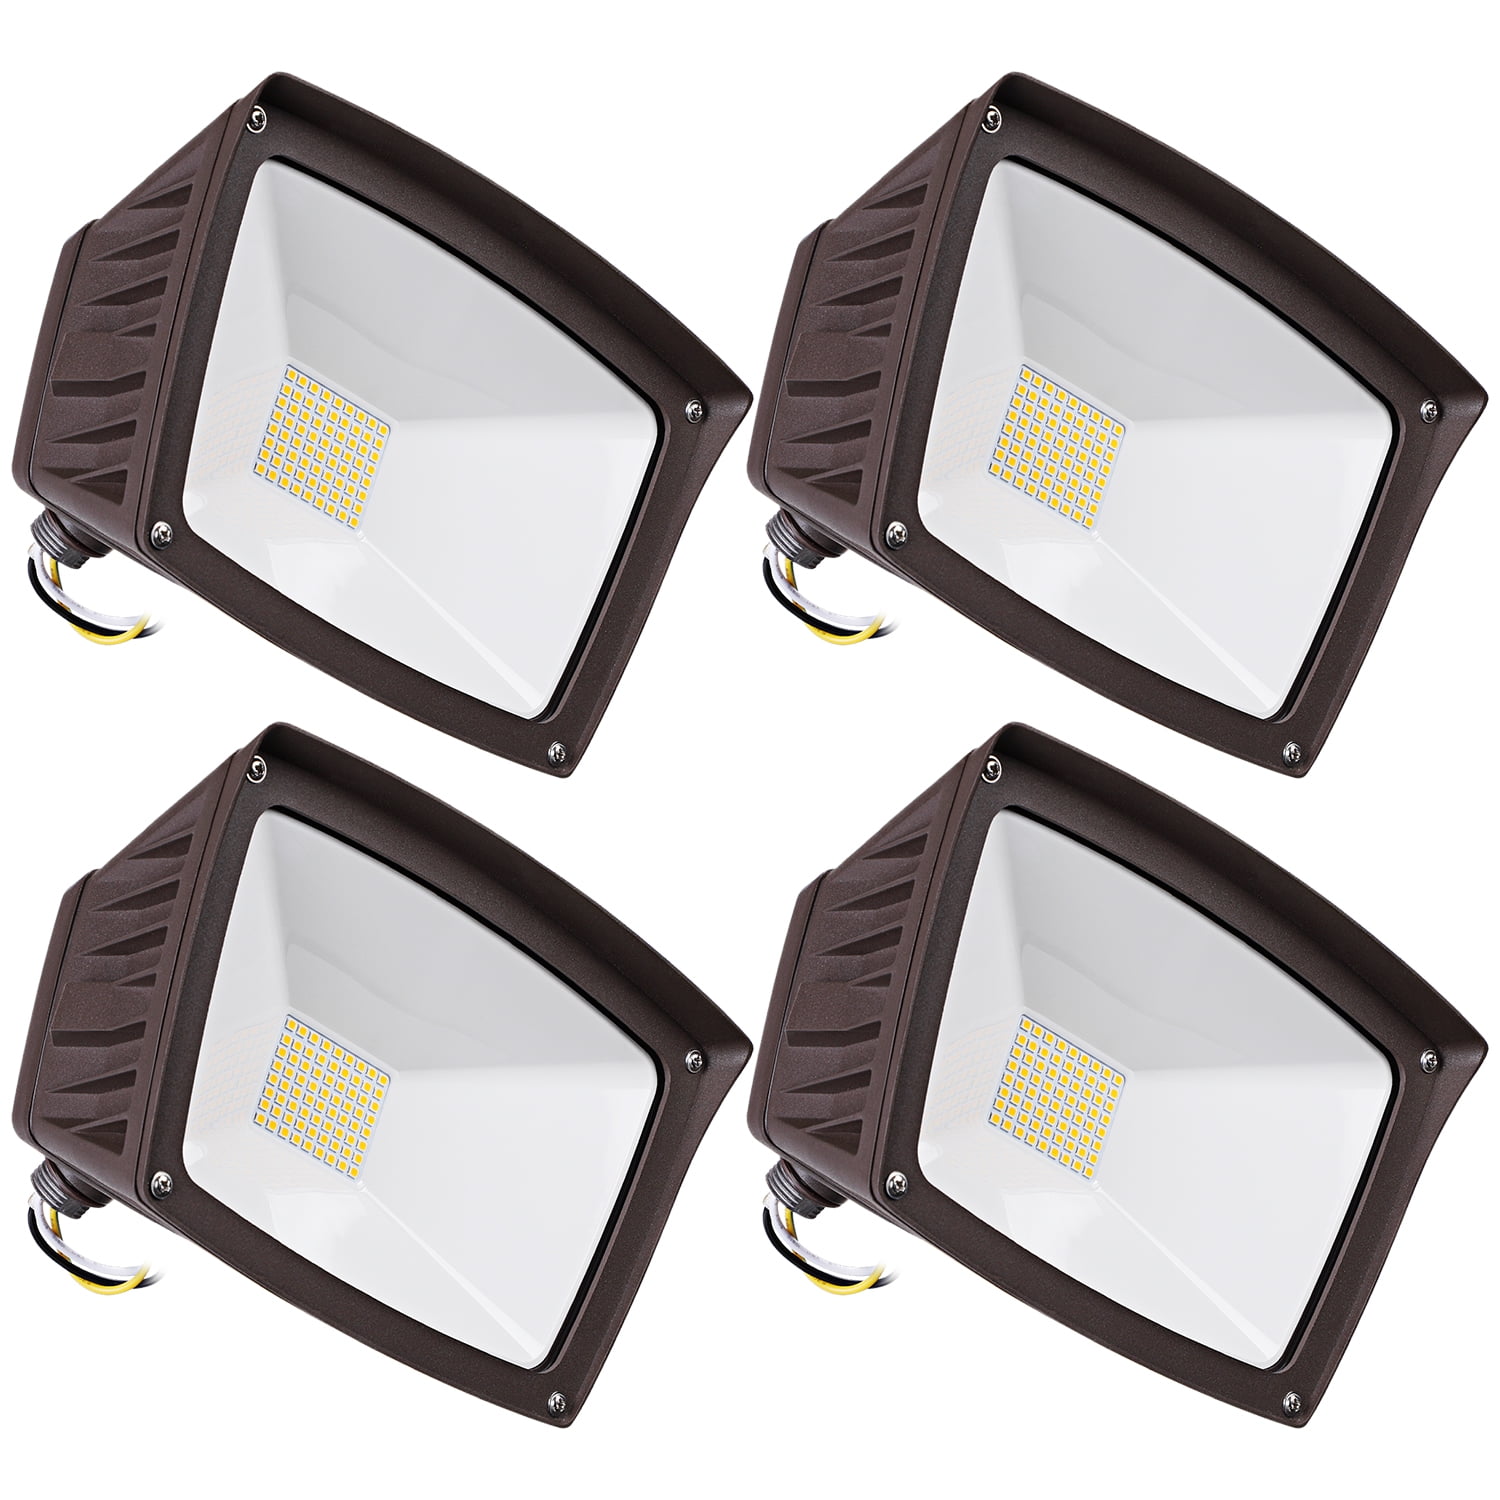 LEONLITE 4-Pack 40W LED Outdoor Flood Light with Knuckle Mount, 4800lm Wall  Washer Security Light, 350W Eqv., IP65 Waterproof, 5000K Daylight, for  Advertising Board, Yard, Parking Lot